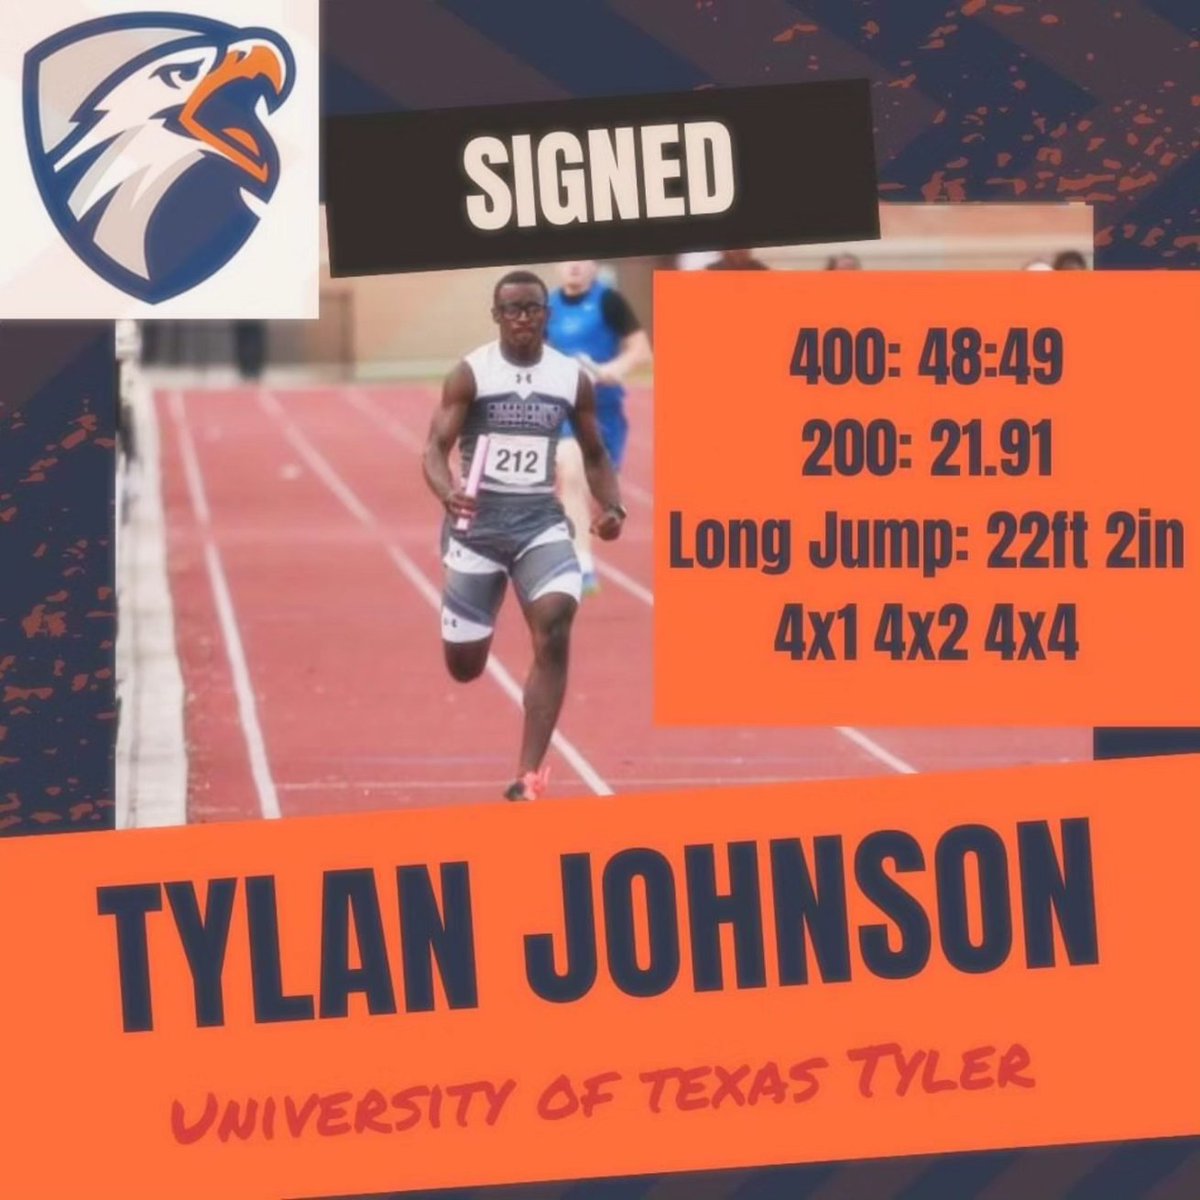 I am honored and proud to be this young man's coach. Great job, Tylan!!! God has a plan for you. Your future is bright, and you will make your family proud. #RichmondElite #ProudCoach #HardWorkPaysOff #tracklife #trackfamily #trackandfield #WeComin #WeRollin #aautrackandfield